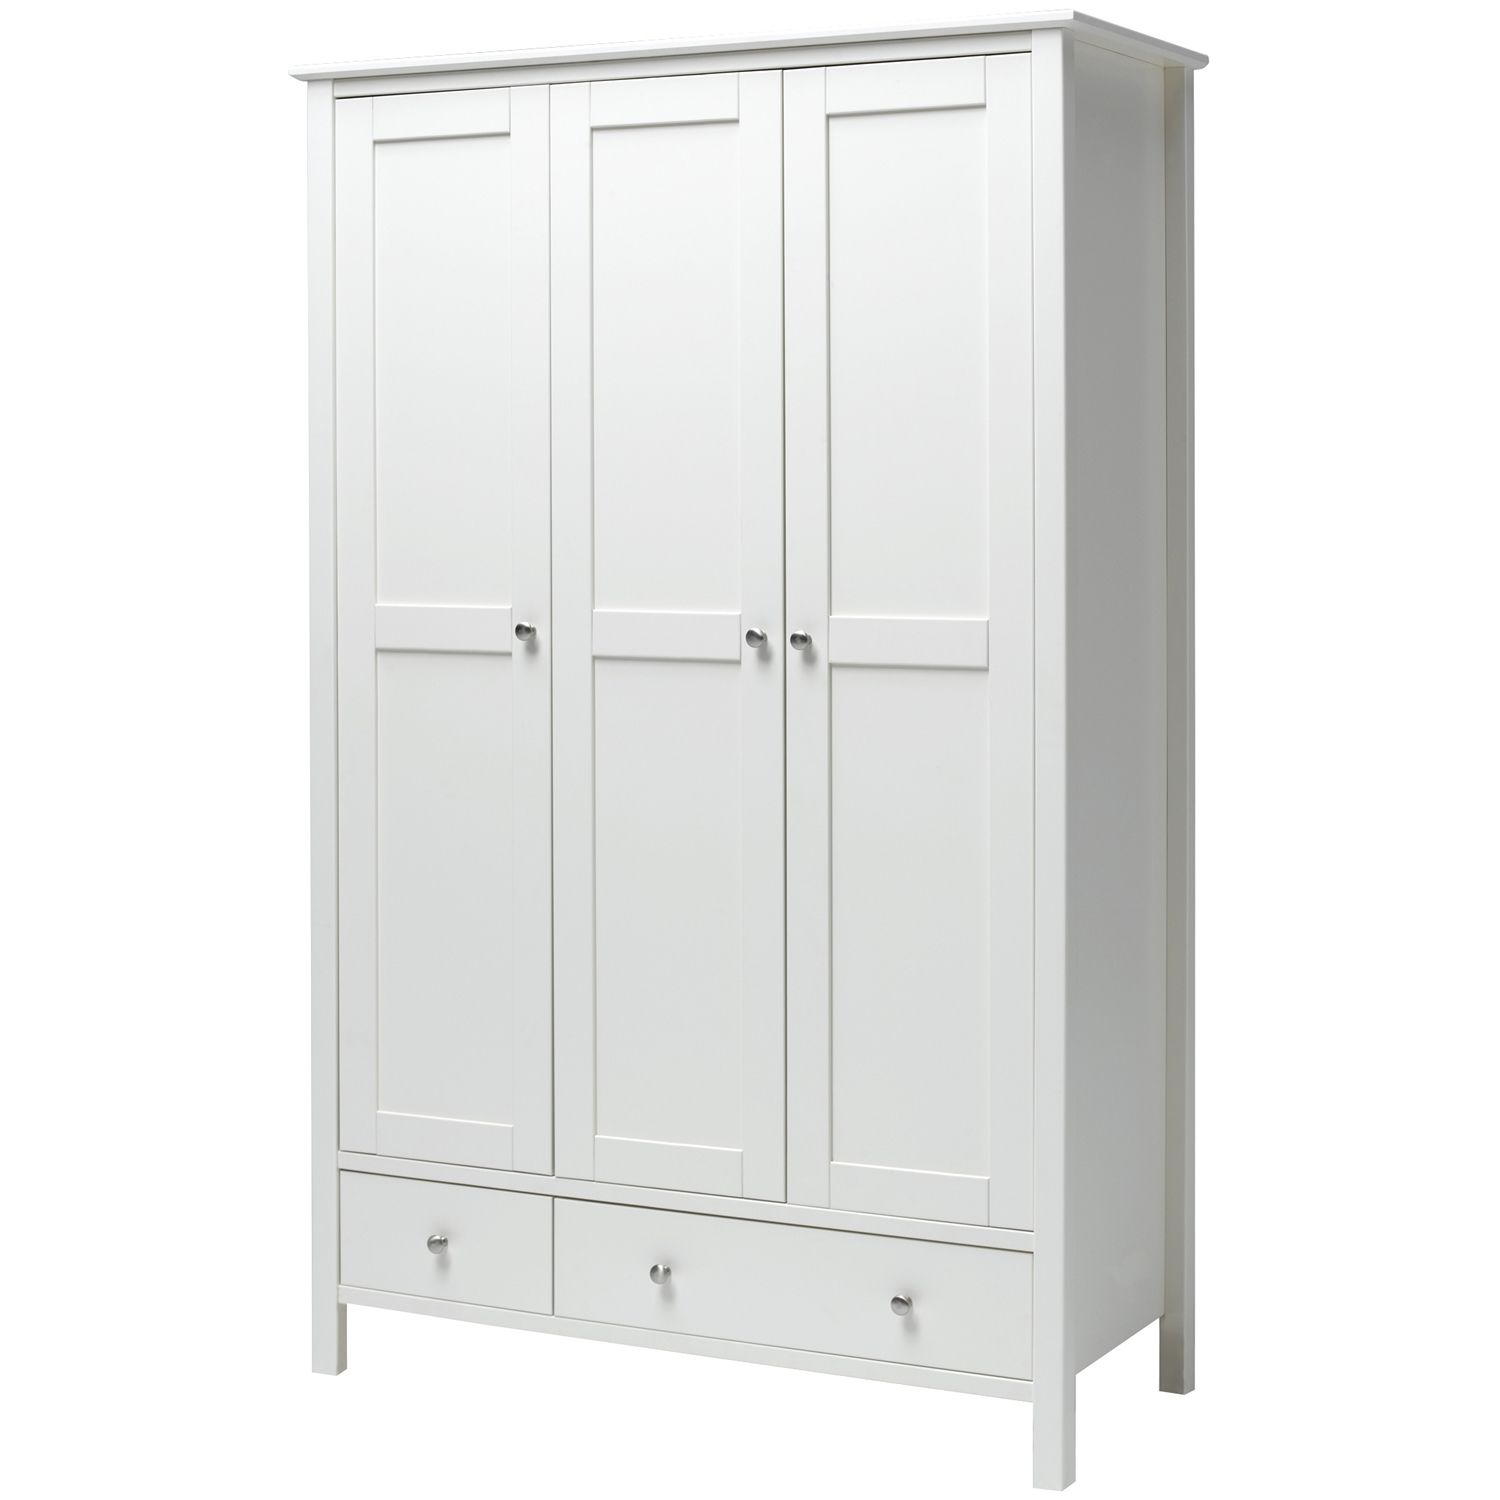 Stockholm 3 Door 2 Drawer Wardrobe White – Simply Furniture Pertaining To Most Recent 3 Door White Wardrobes With Drawers (View 1 of 15)